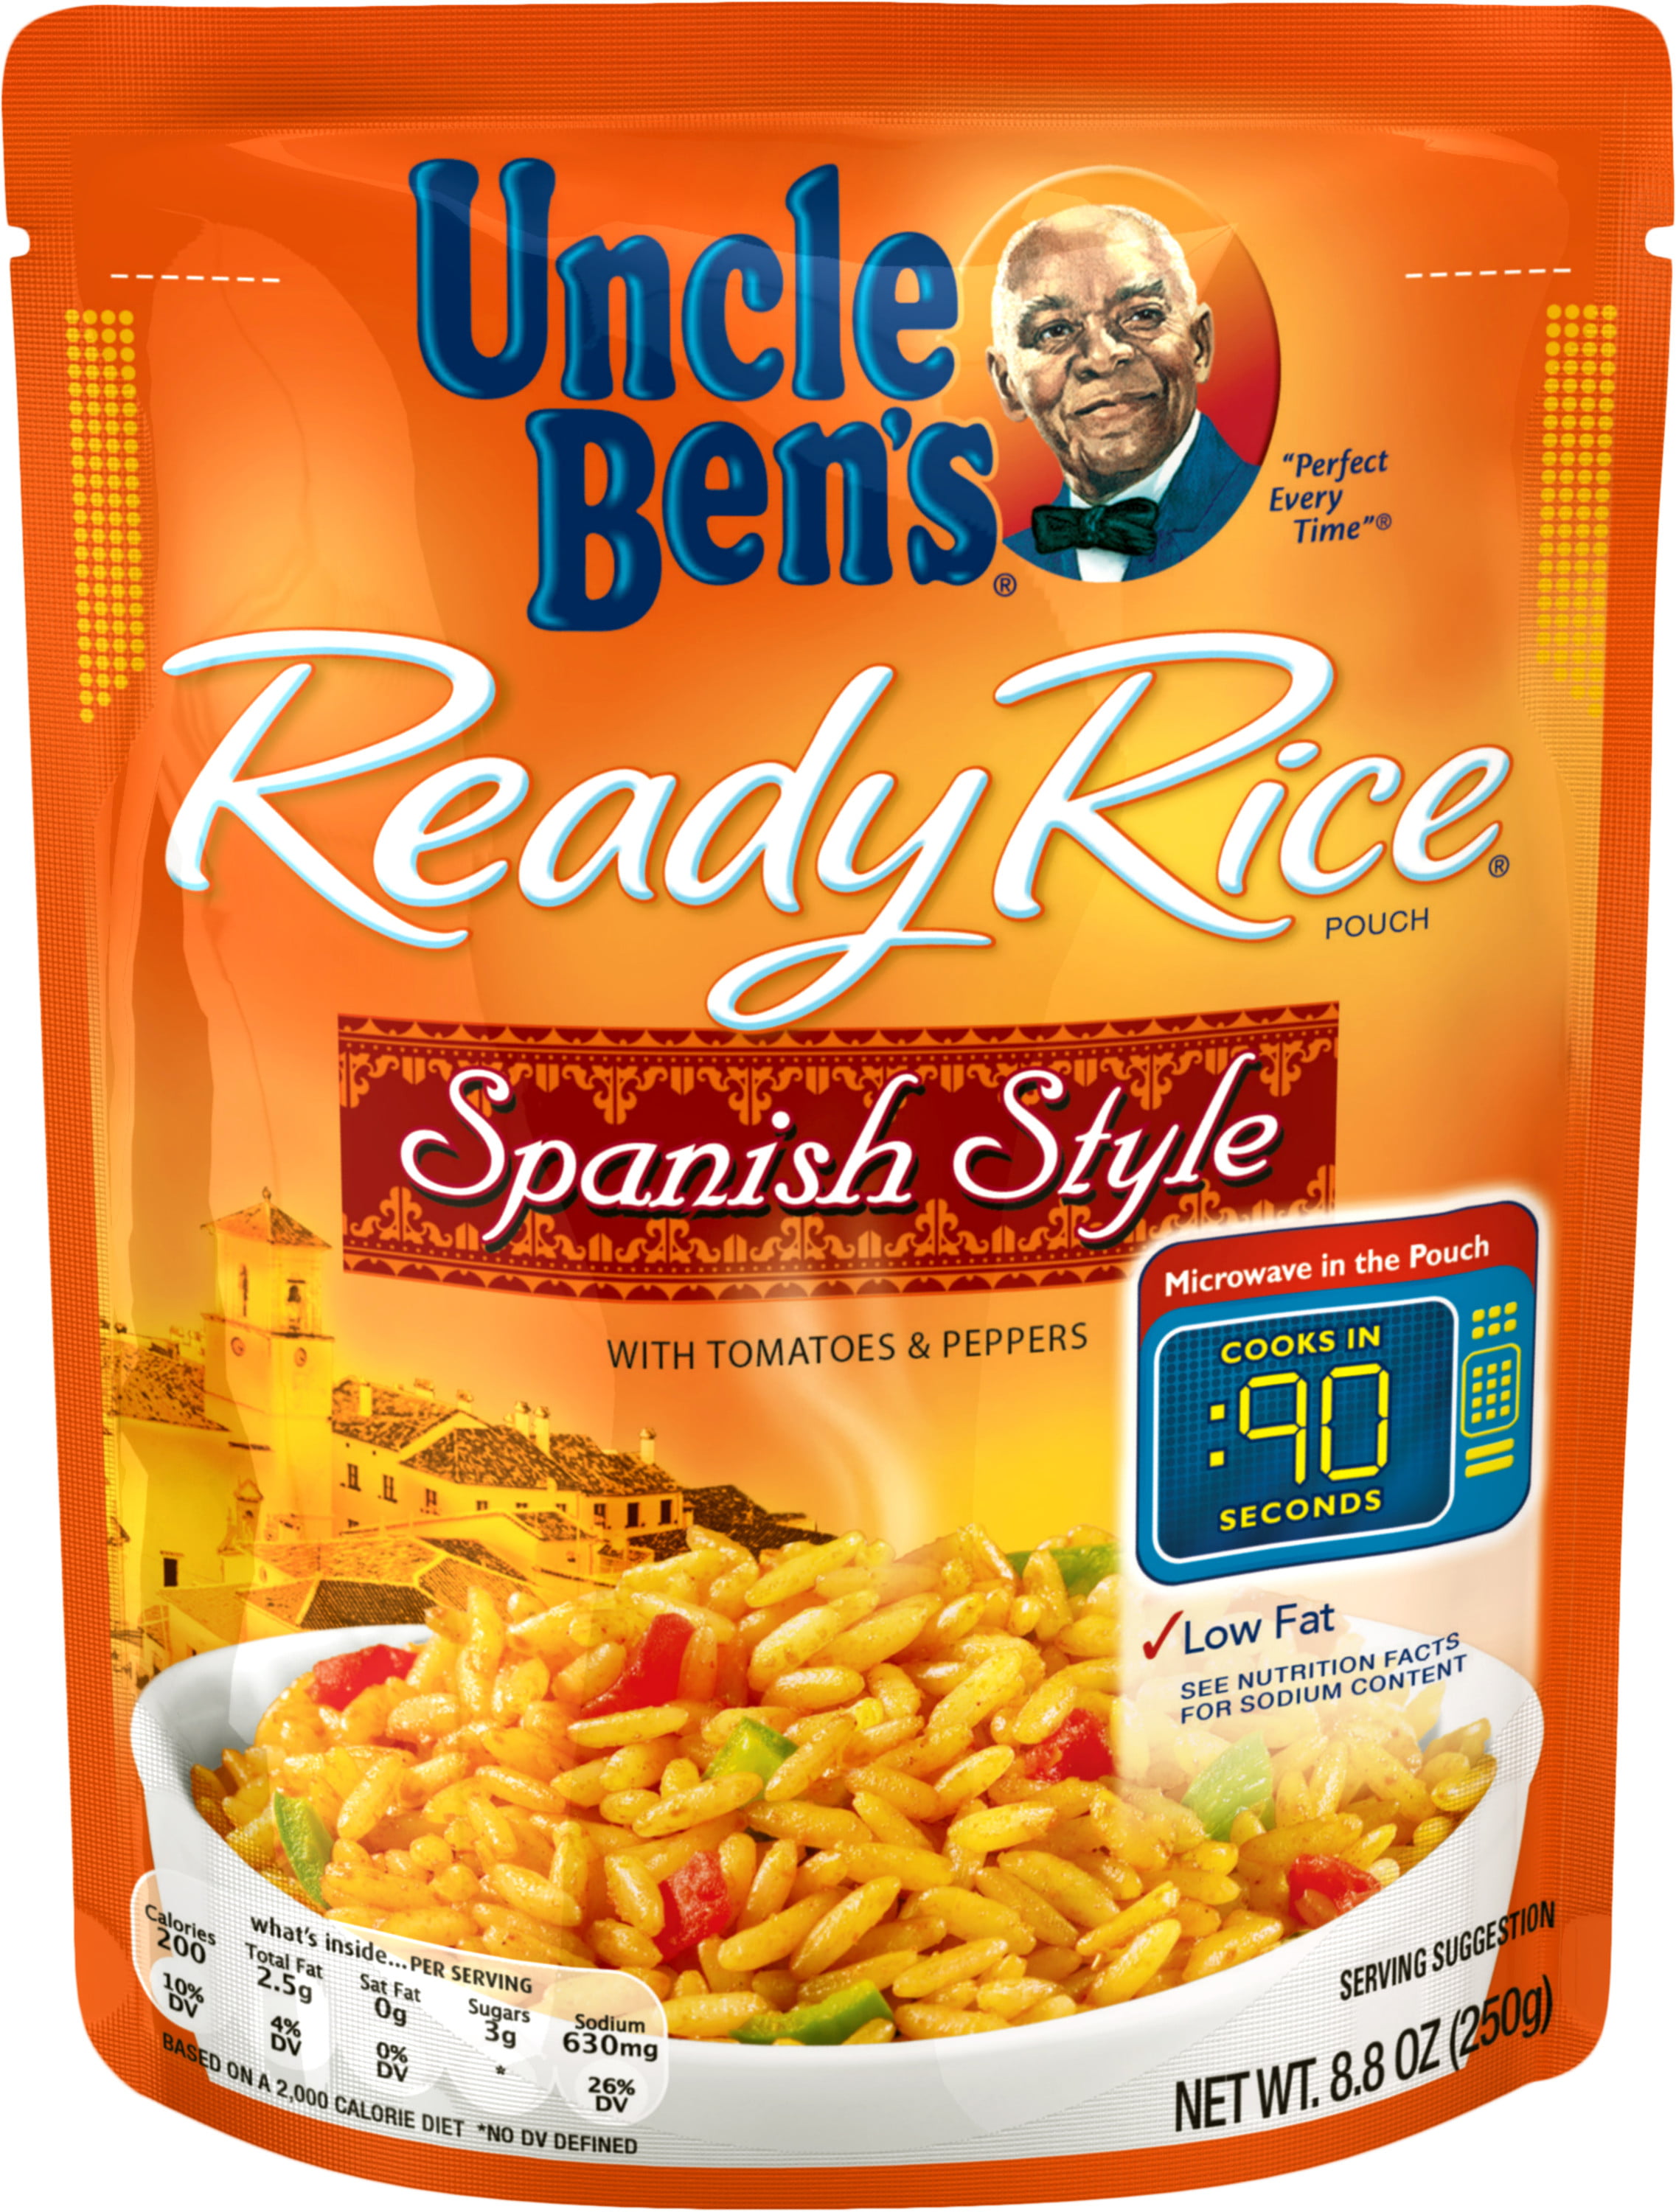 Is Uncle Ben’s Spanish Rice Gluten Free? - The Ultimate Guide - PlantHD